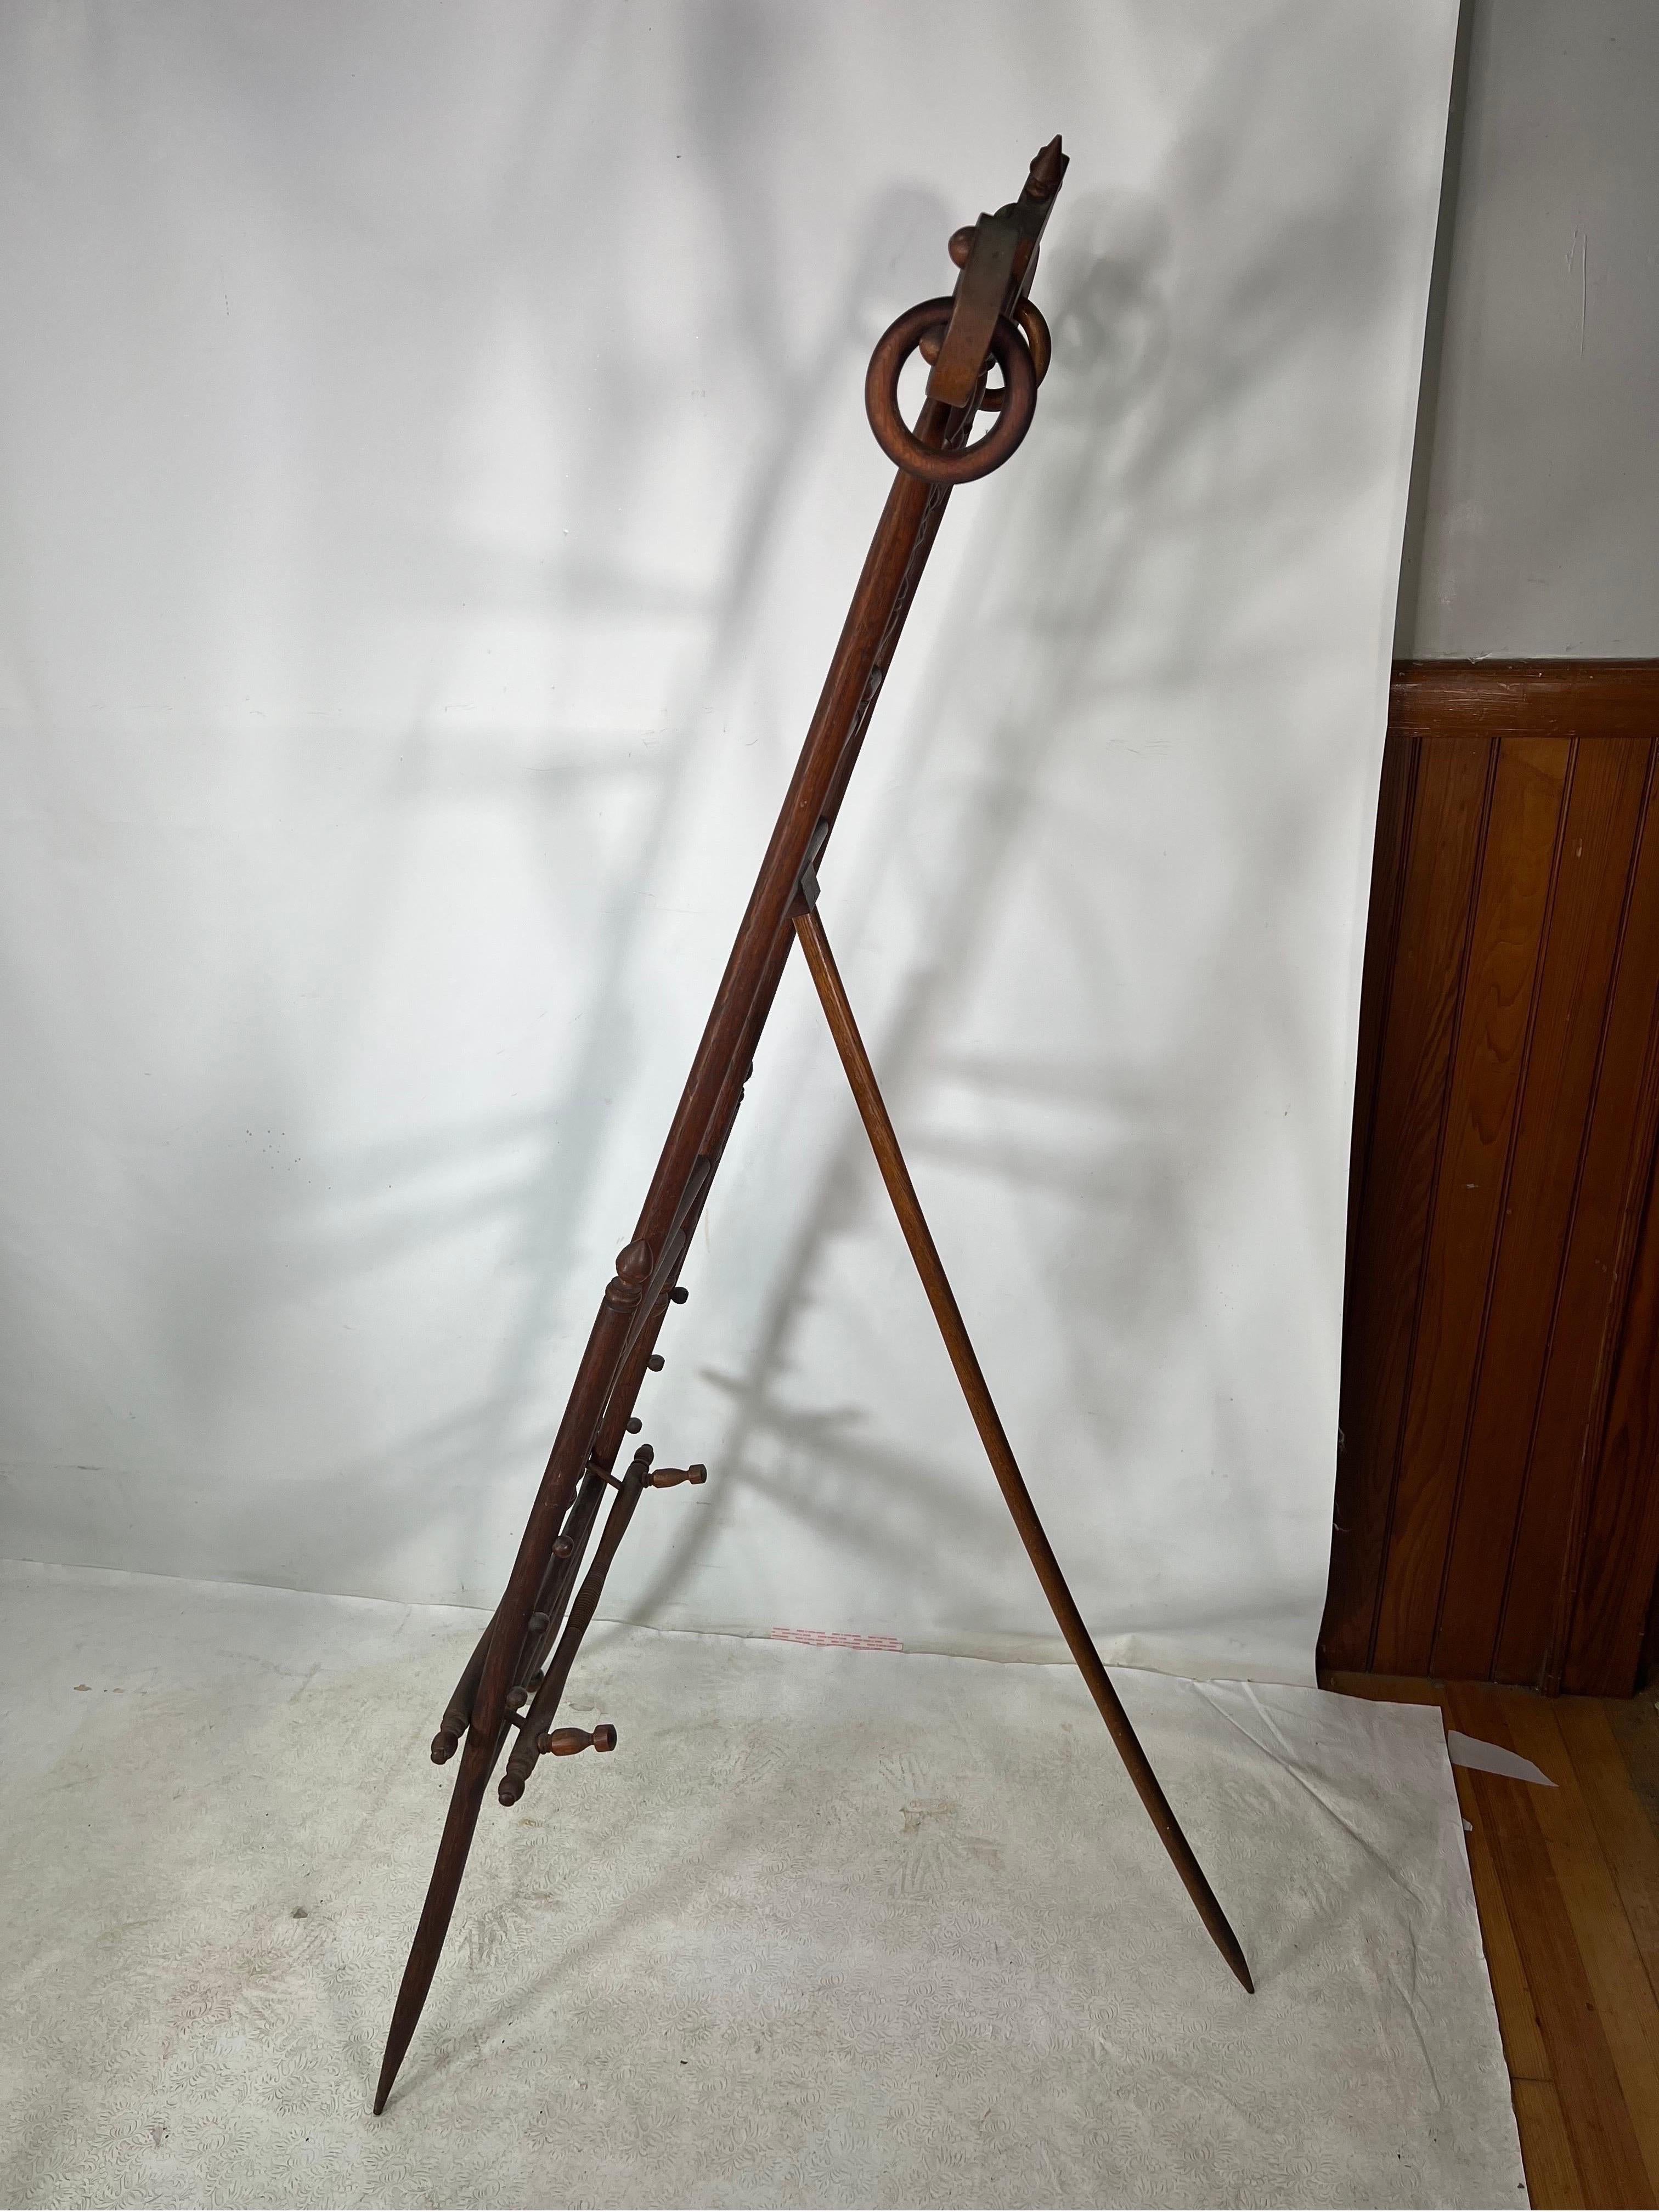 For sale is this stunning antique display easel. The easel is made out of oak.